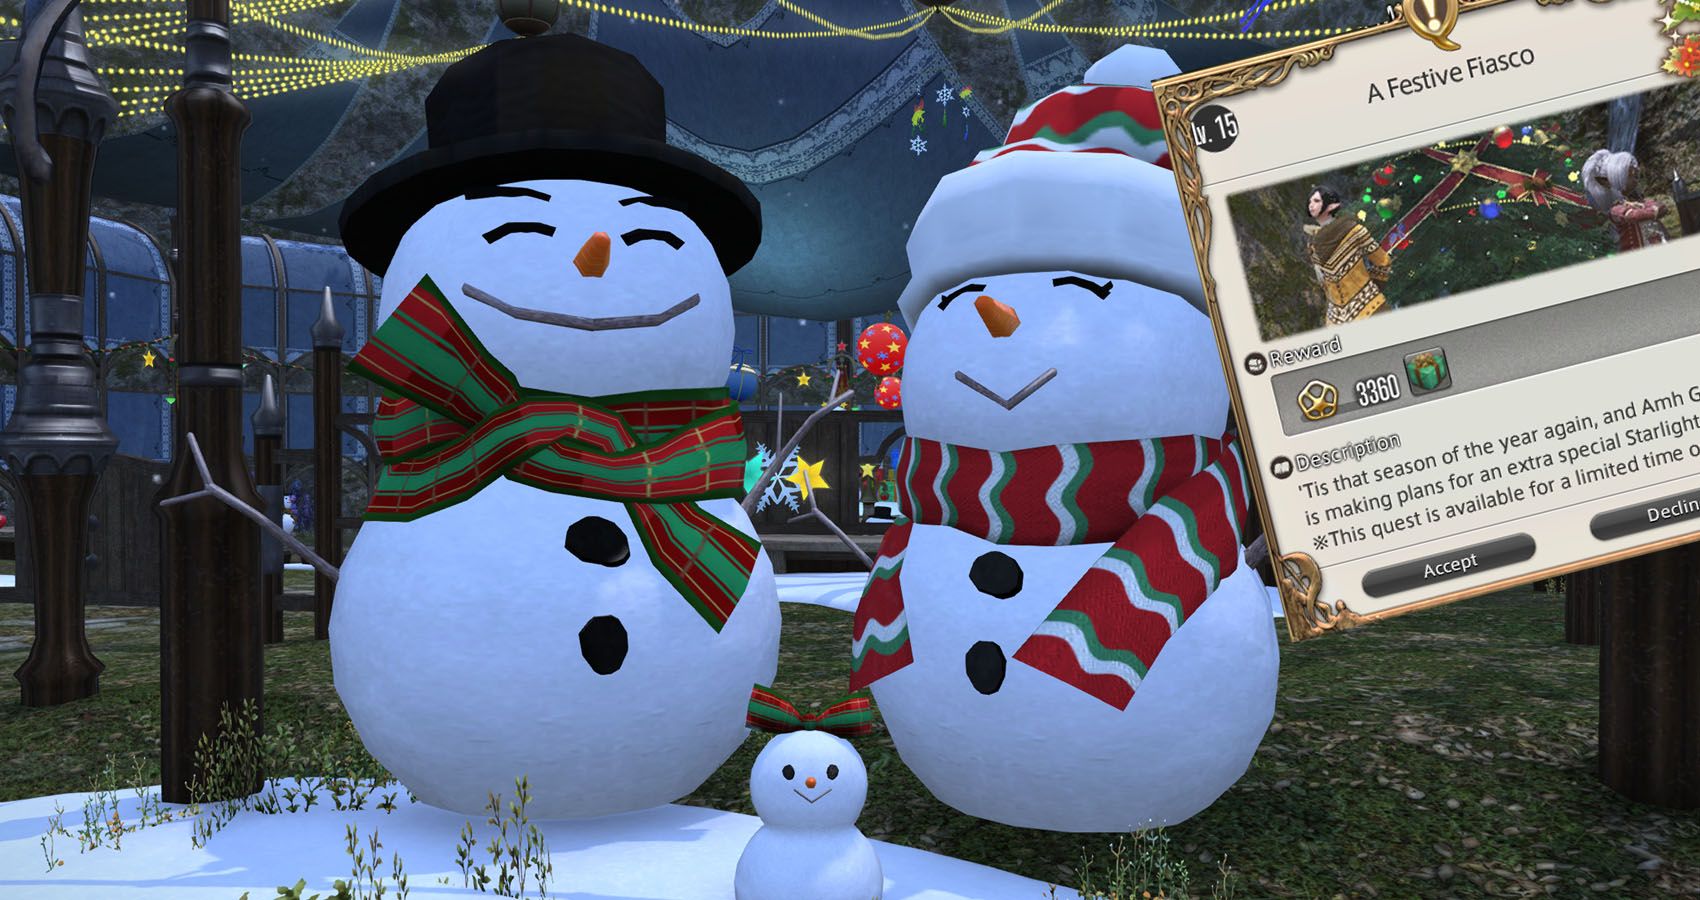 Final Fantasy 14s Starlight Celebration Returns Today With The Cutest Holiday Mount